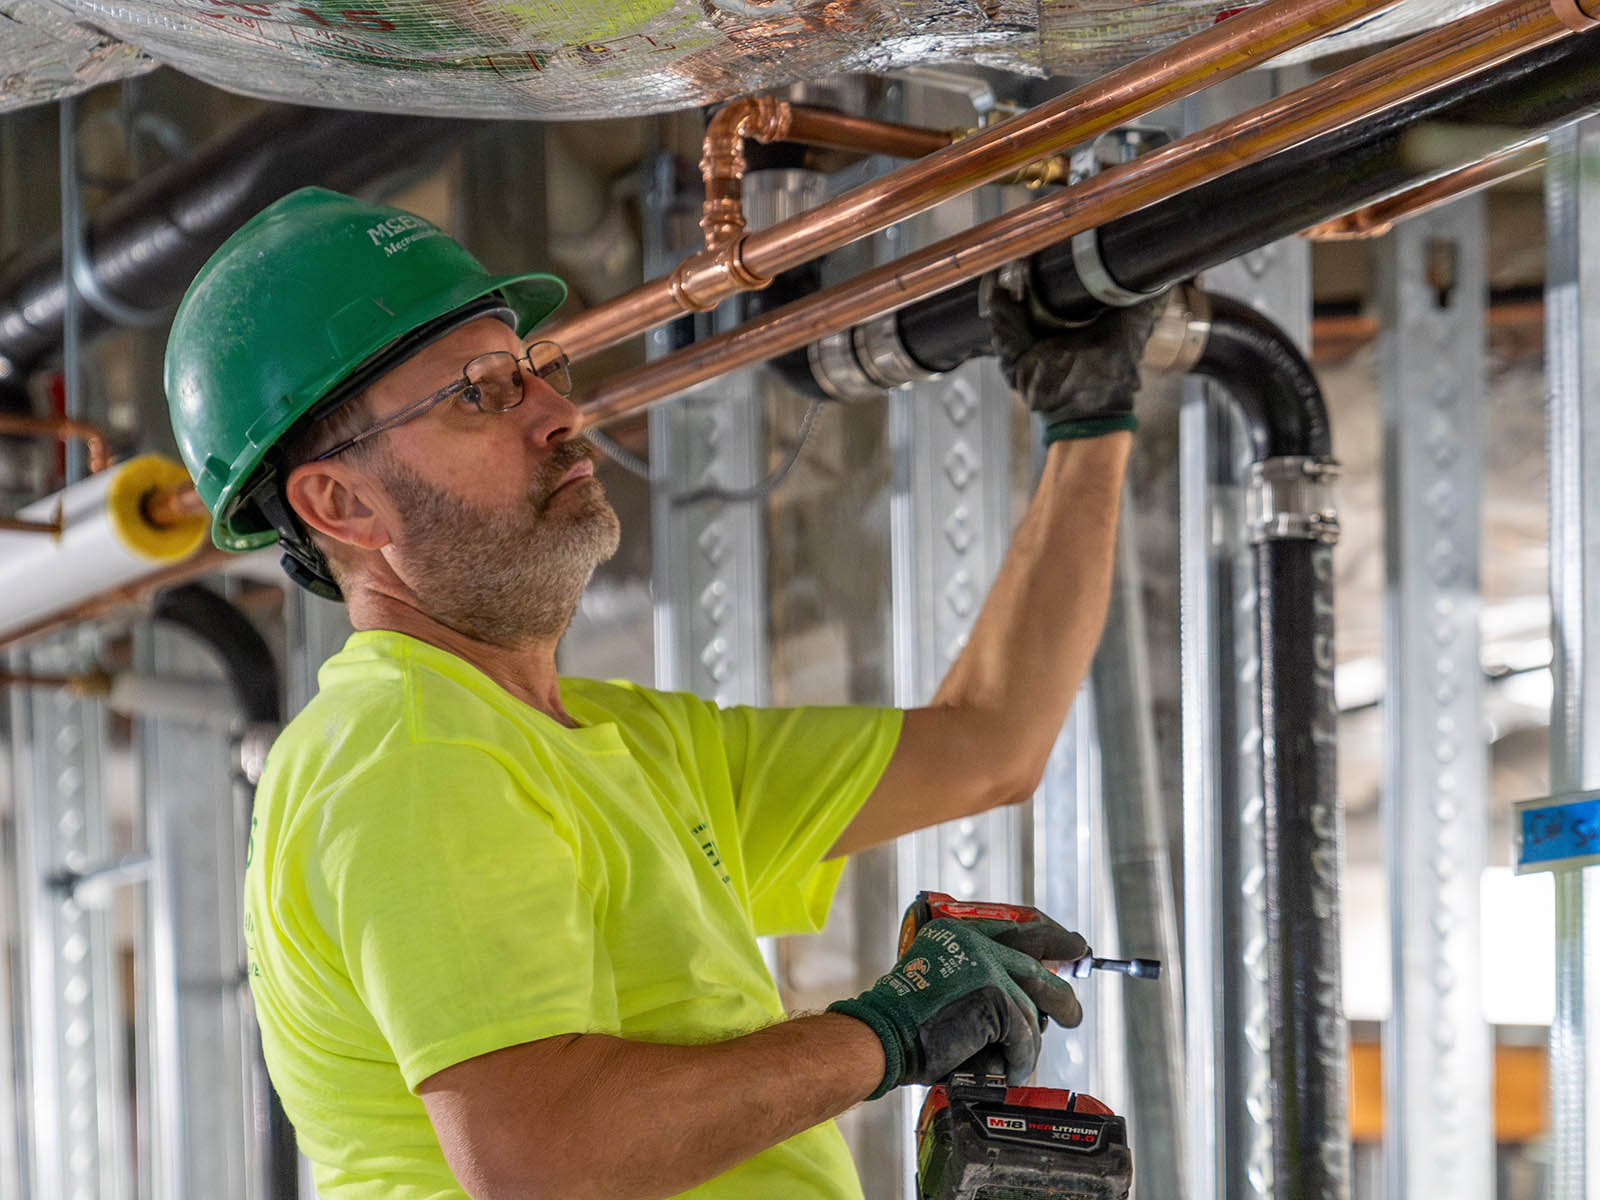 Shane Hillebert, McElroy’s commercial construction pipefitter, carefully checks the alignment of the piping system he is building.